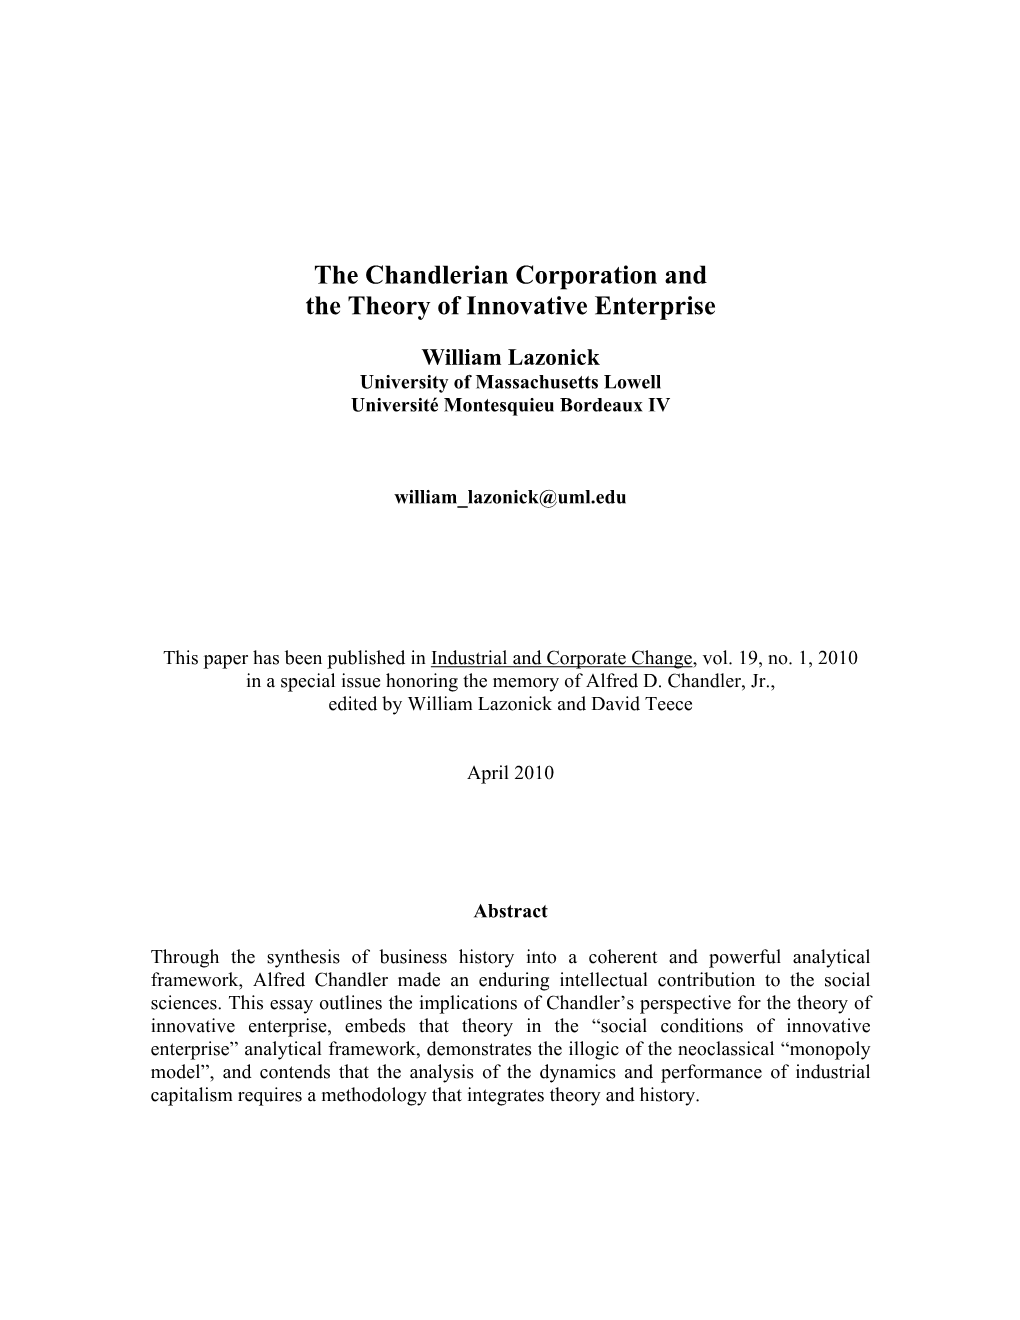 The Chandlerian Corporation and the Theory of Innovative Enterprise